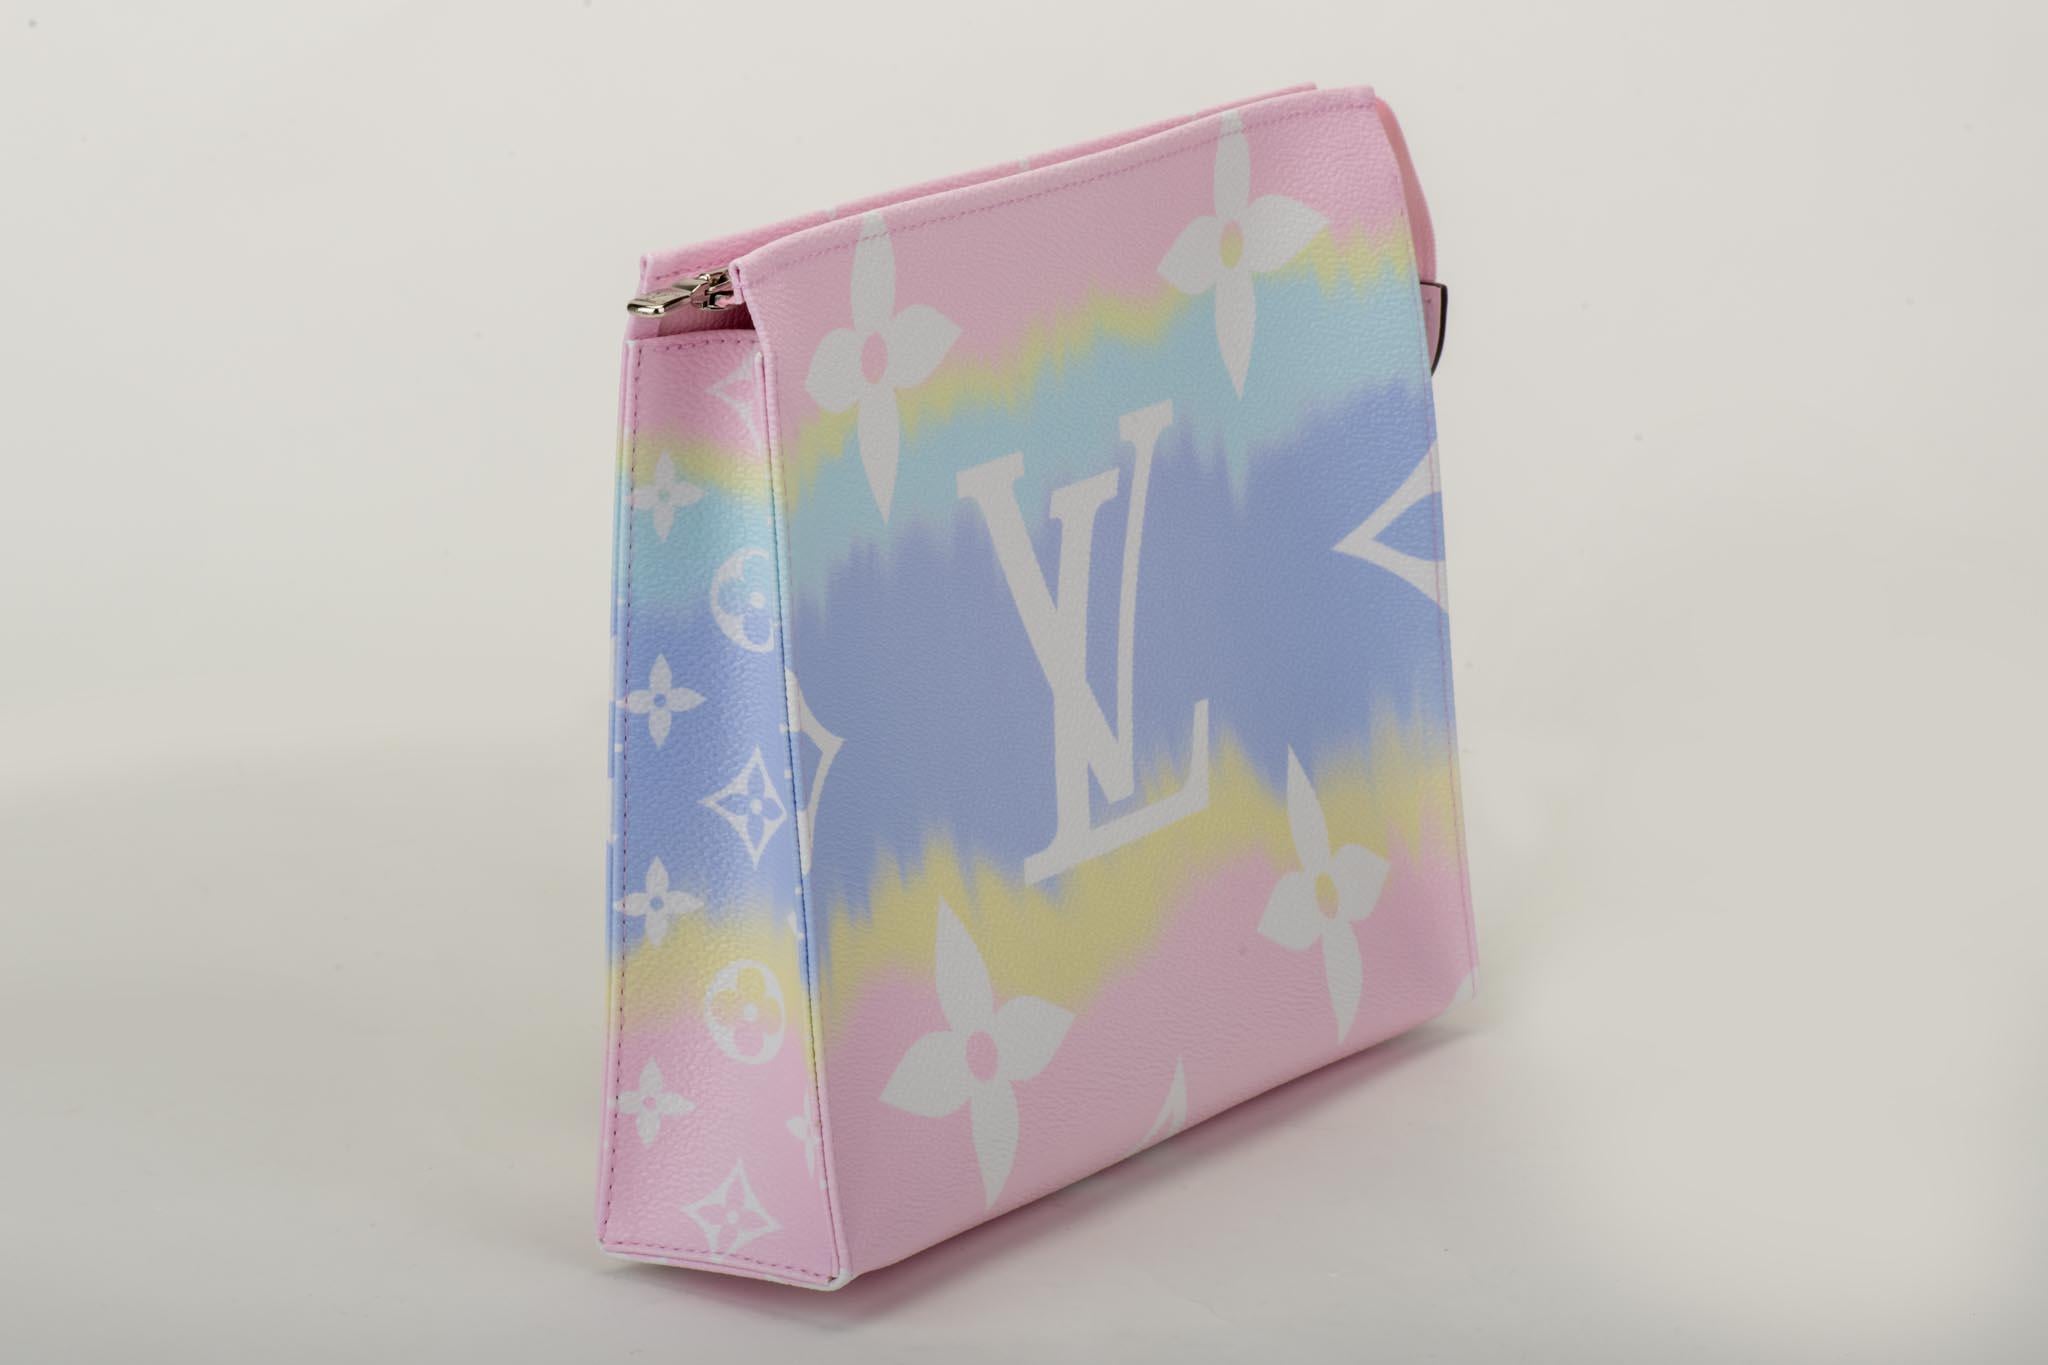 Louis Vuitton 2020 limited edition escale pink and lavender tie die trousse/pochette. Brand new in box with original dust cover.